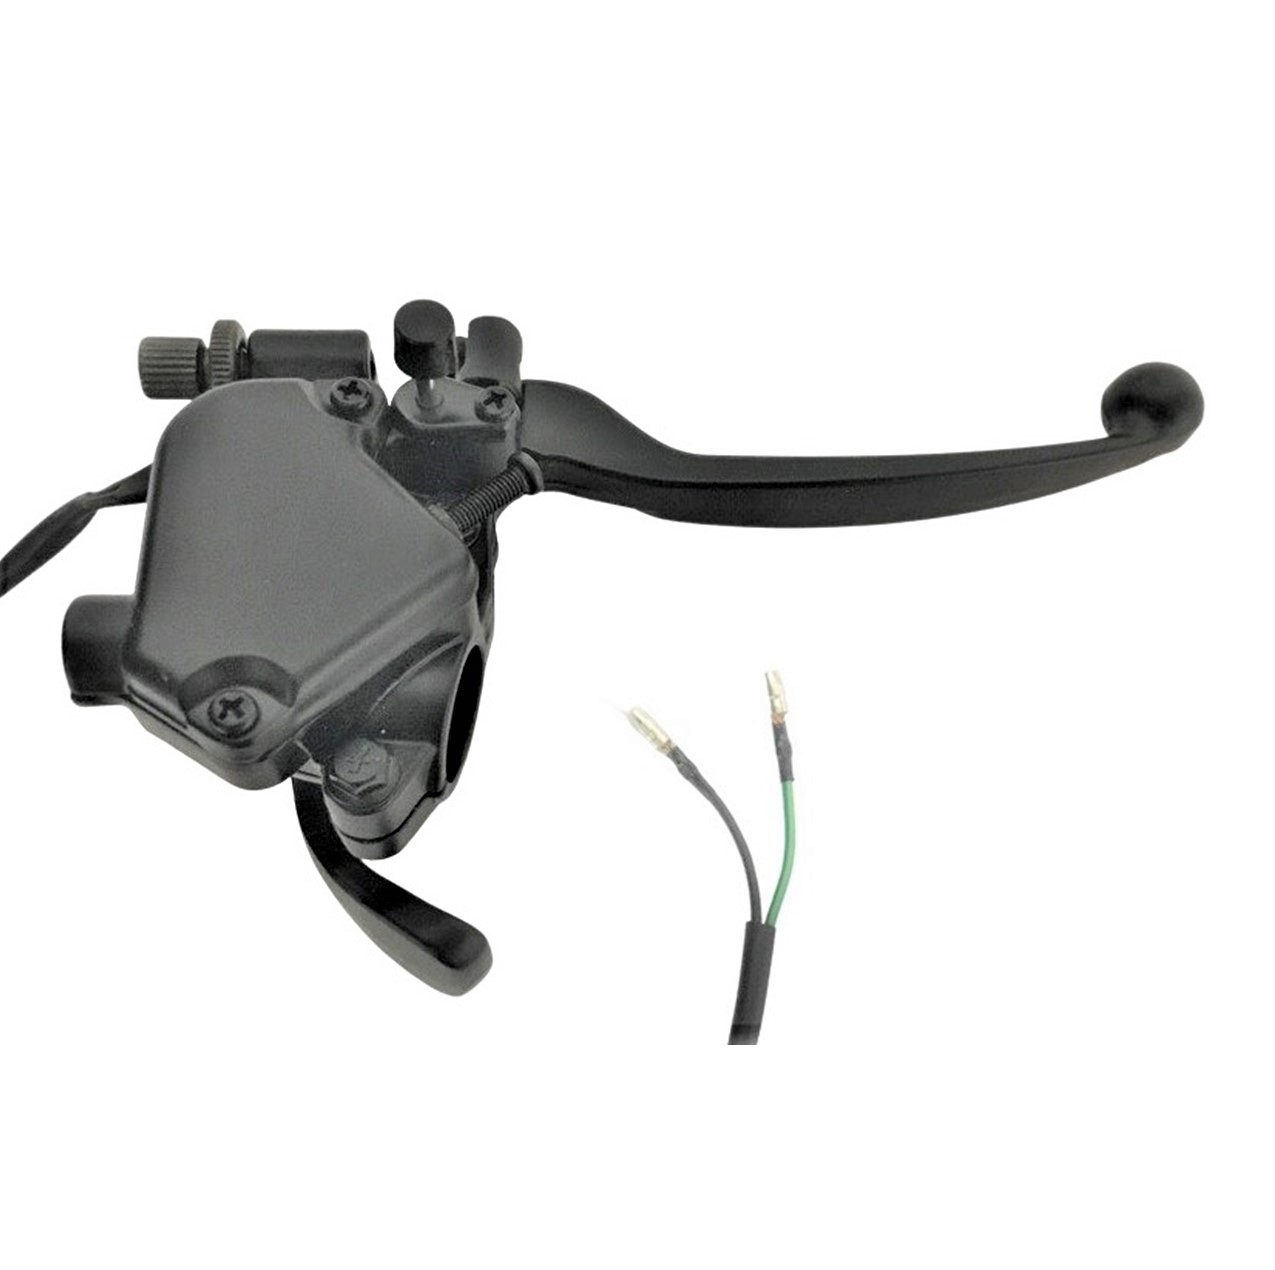 ATV Throttle ASSY Fits Most 50-250cc ATVs with Right Hande Double Front Brake Cables.